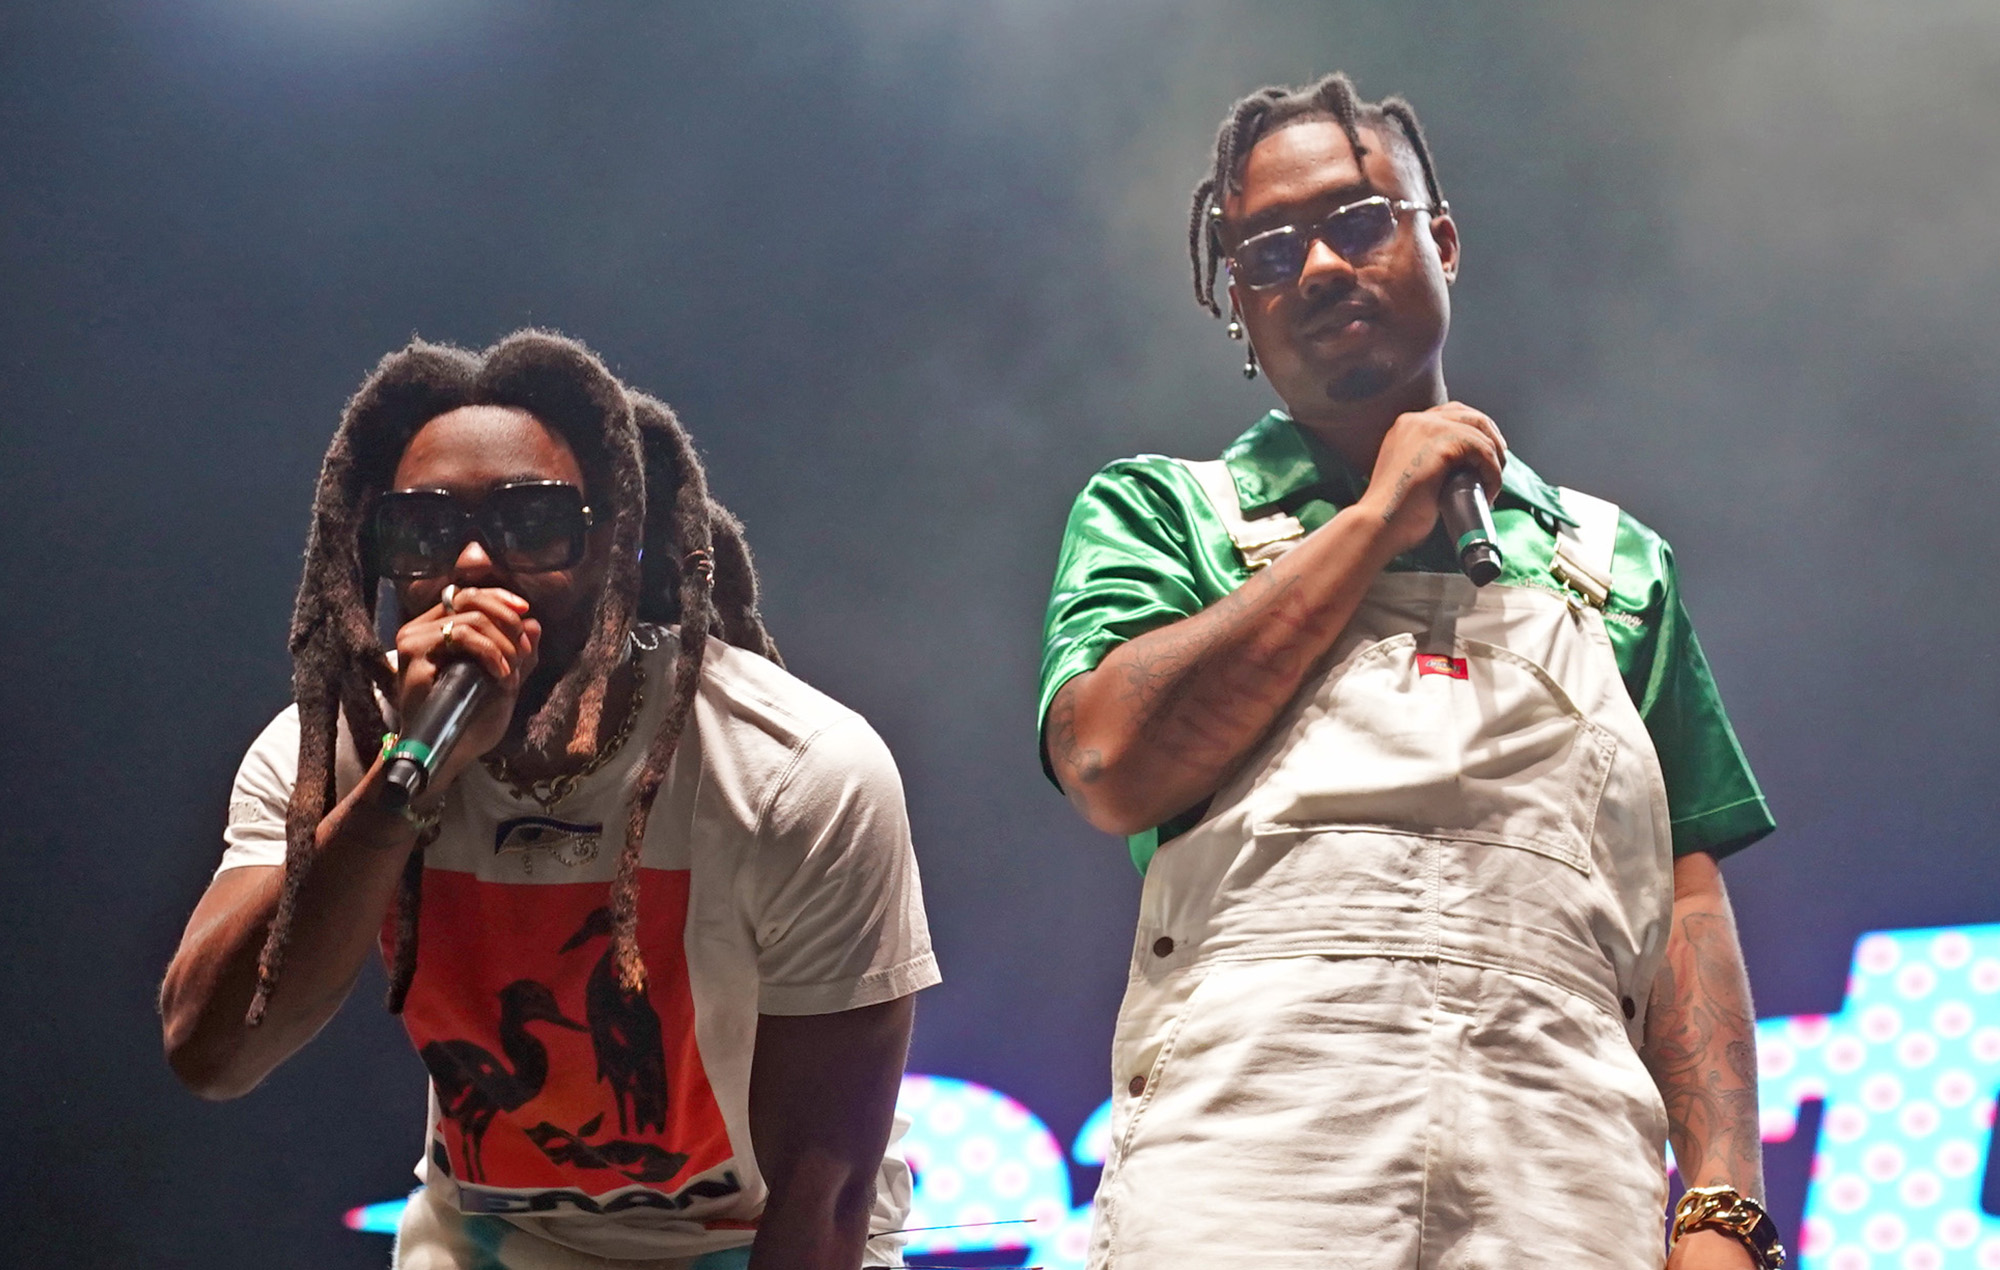 EarthGang plea for return of hard drives containing new music